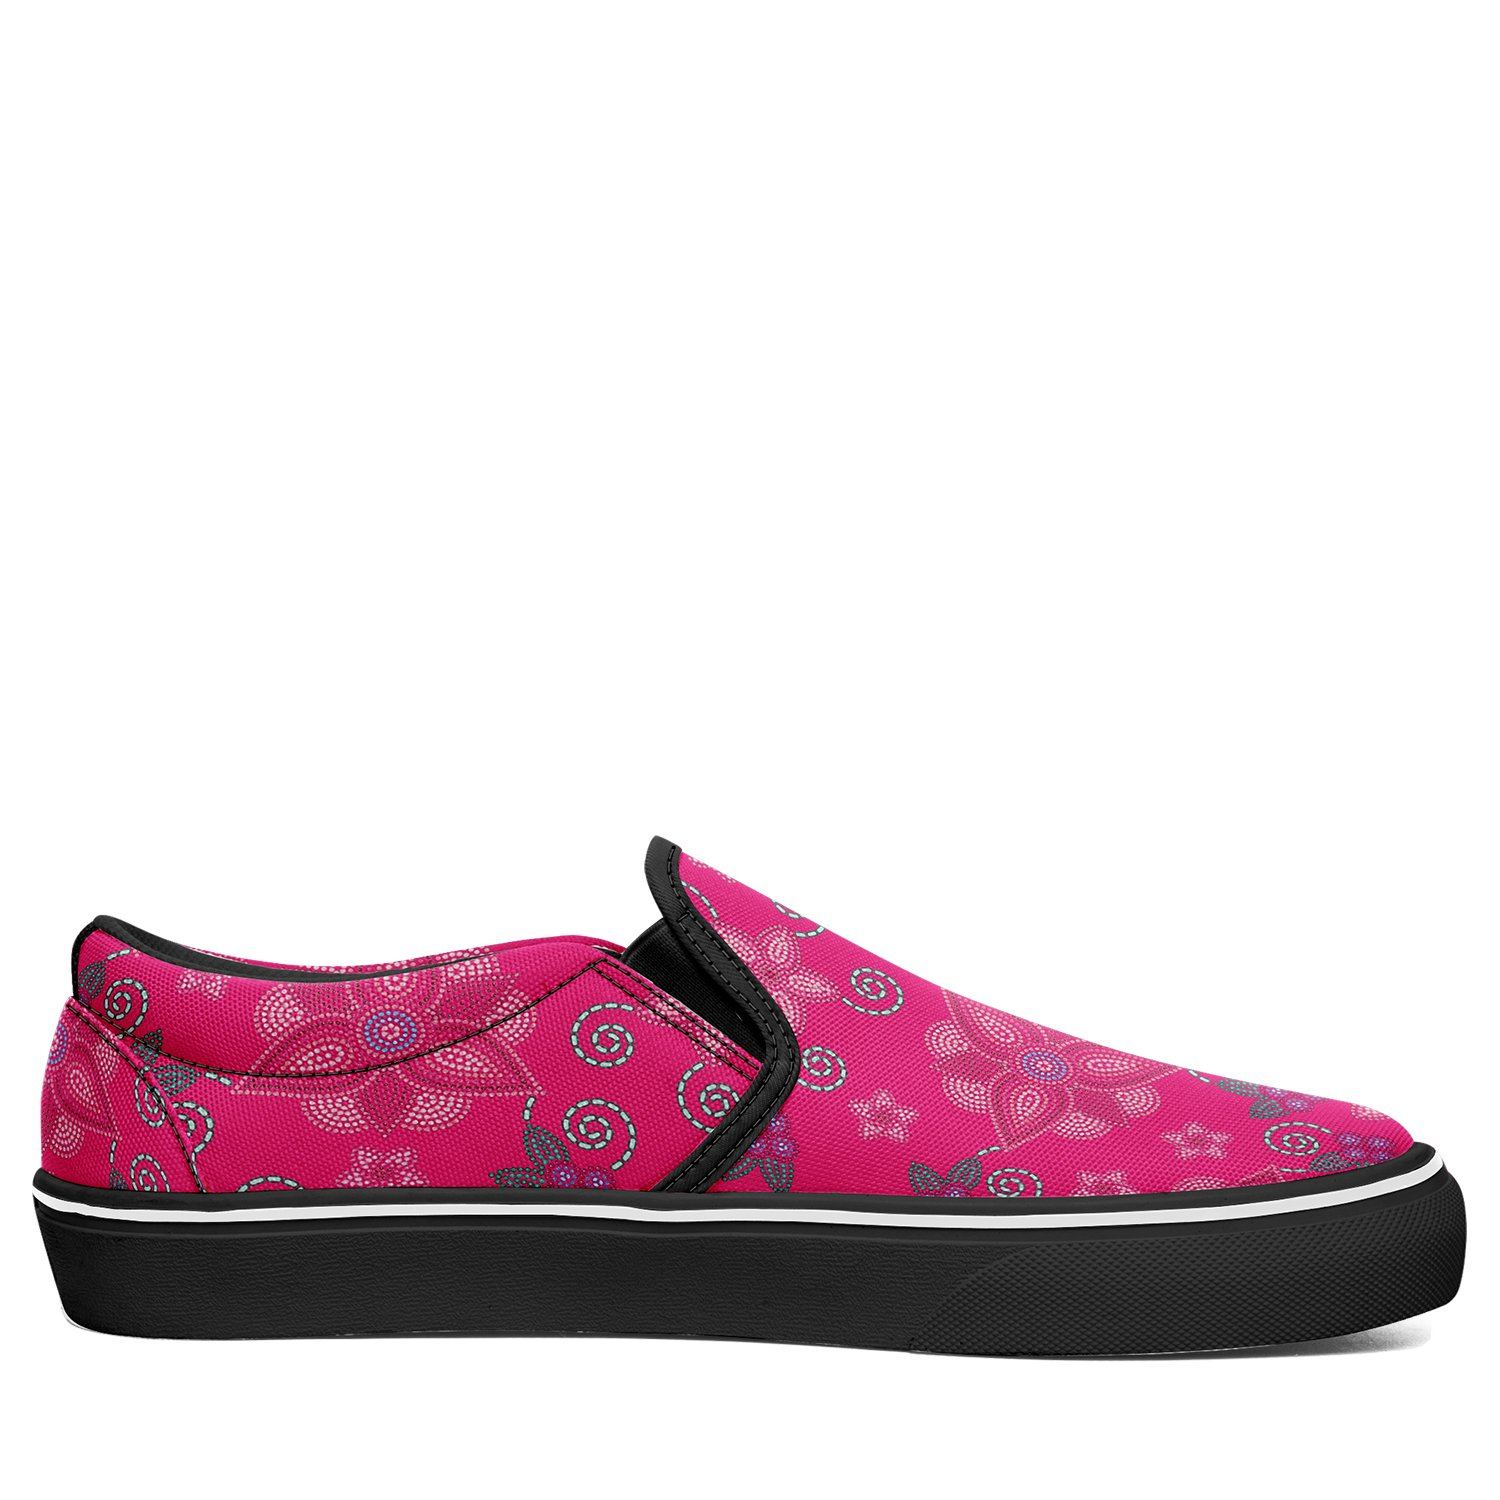 On Canvas Kids Shoes Slip Otoyimm